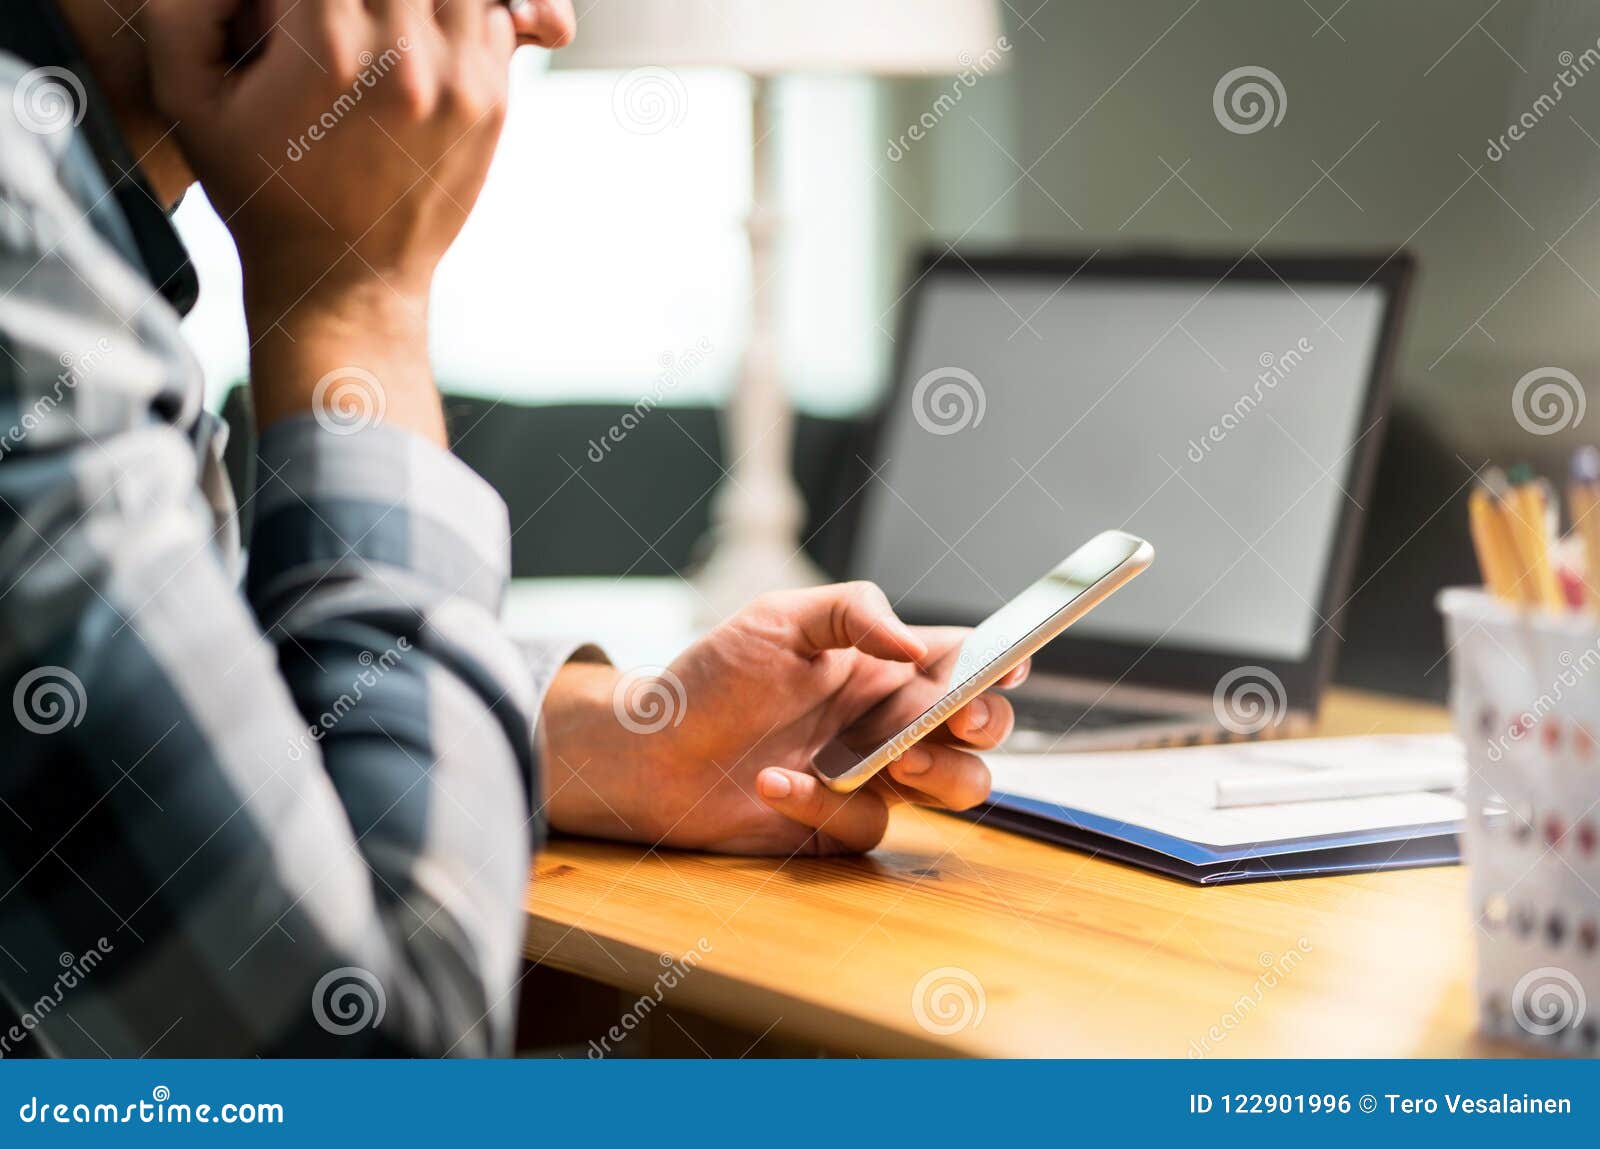 lazy worker using phone in office avoiding work